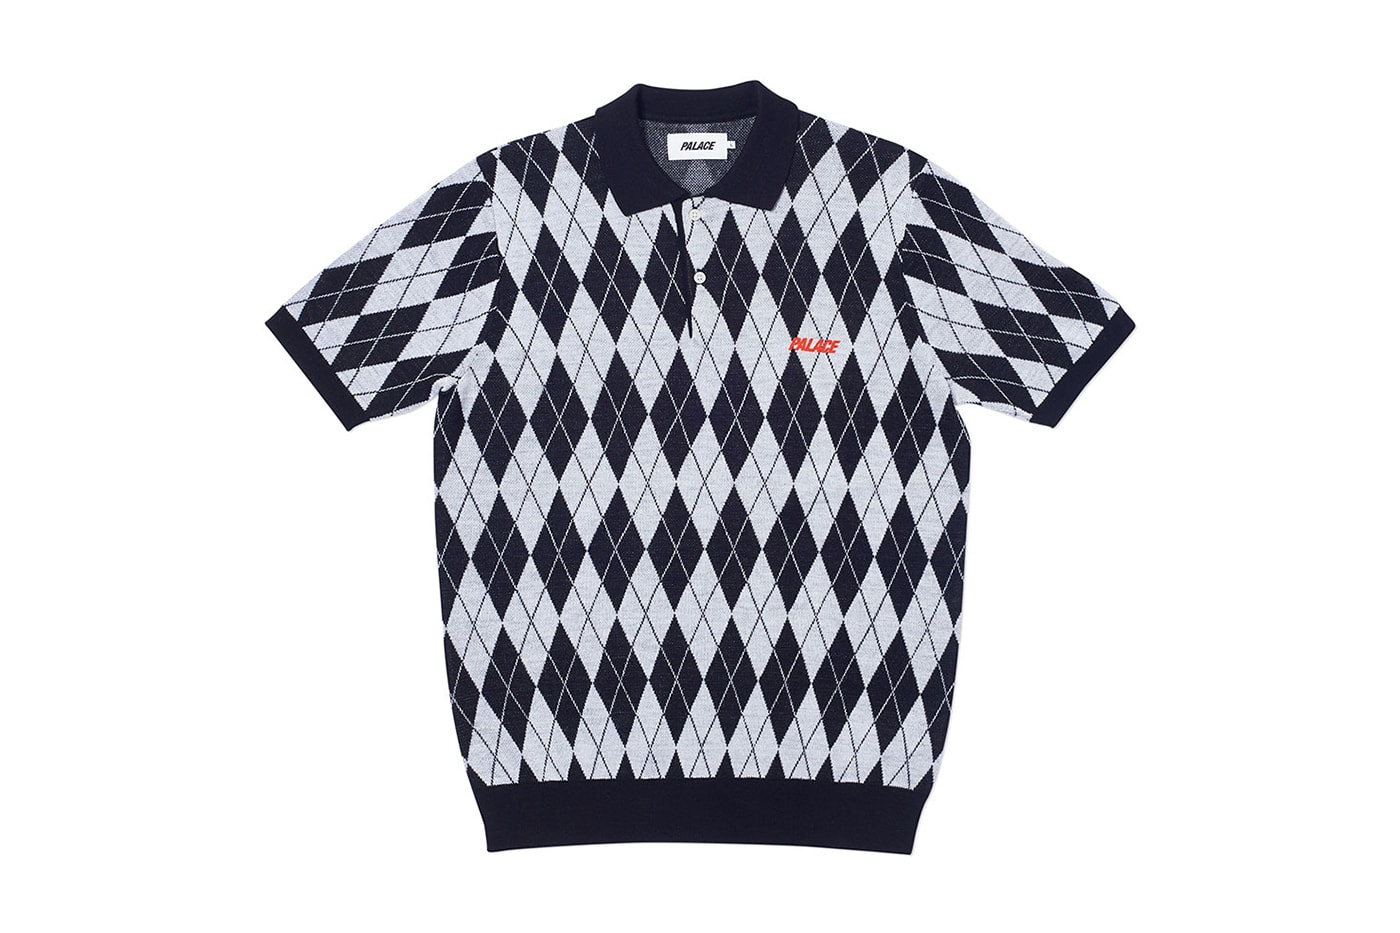 Palace 2019 Summer Tops, Shirts, Rugbys, Polos spring ss19 drop release date info closer look